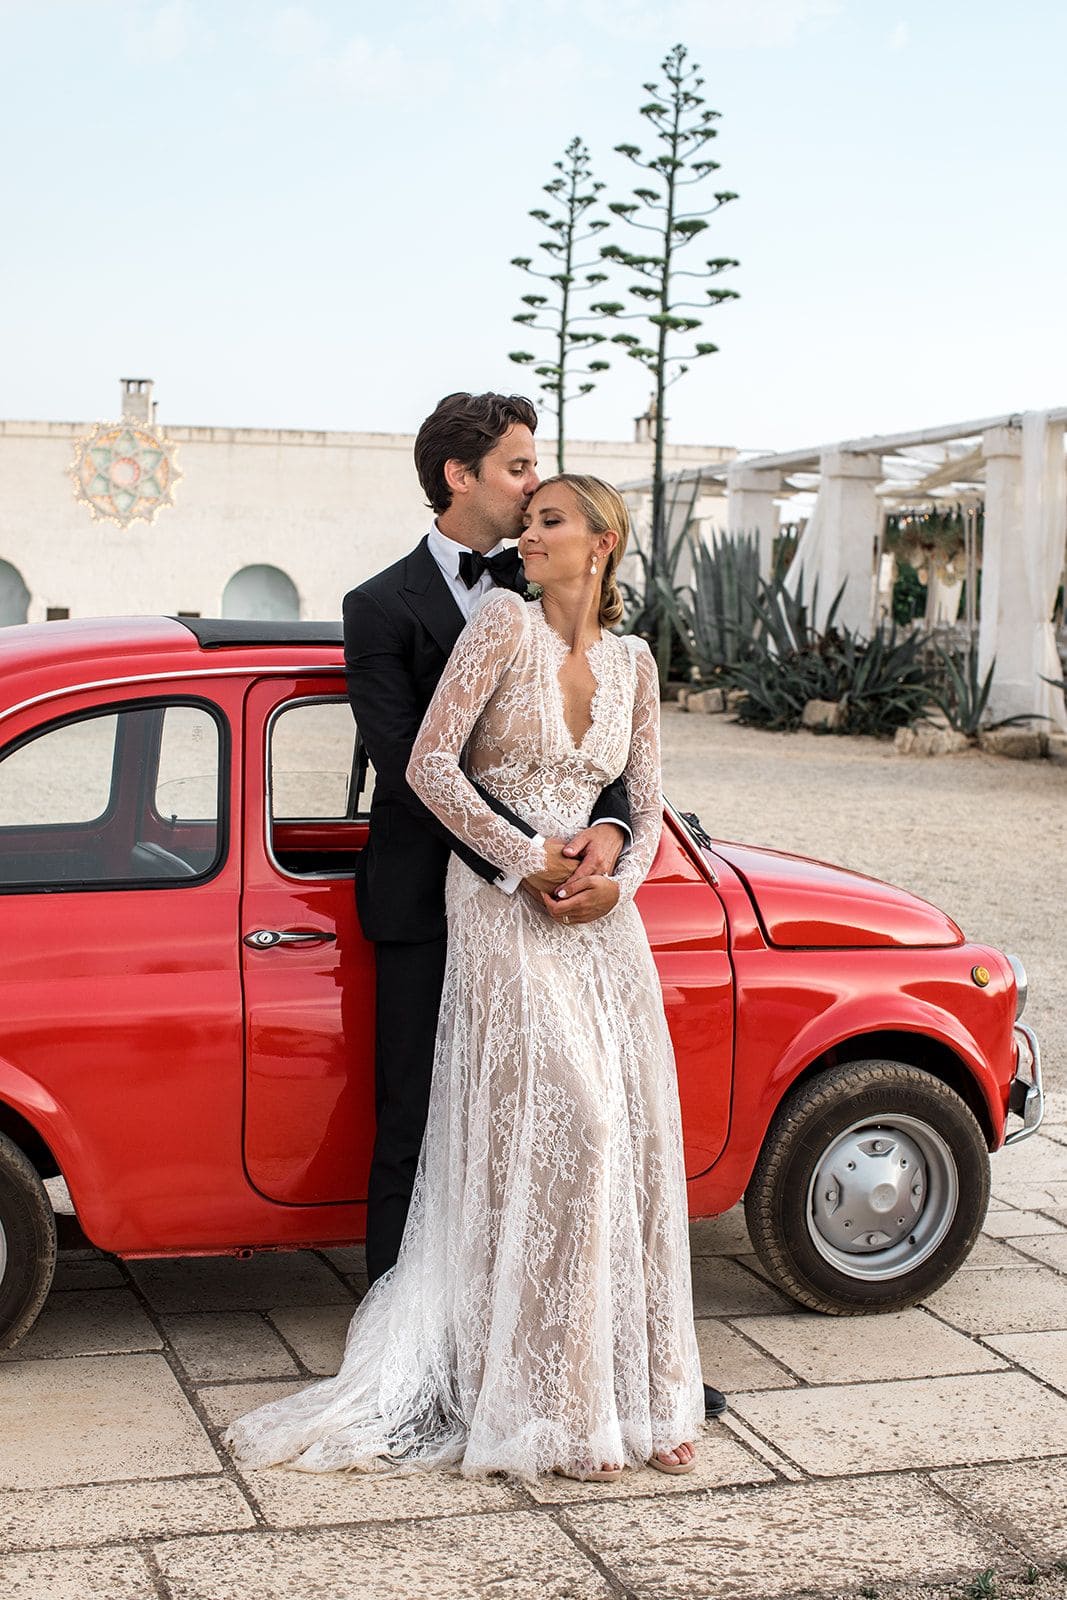 Bride groom against small red car in Puglia Italy